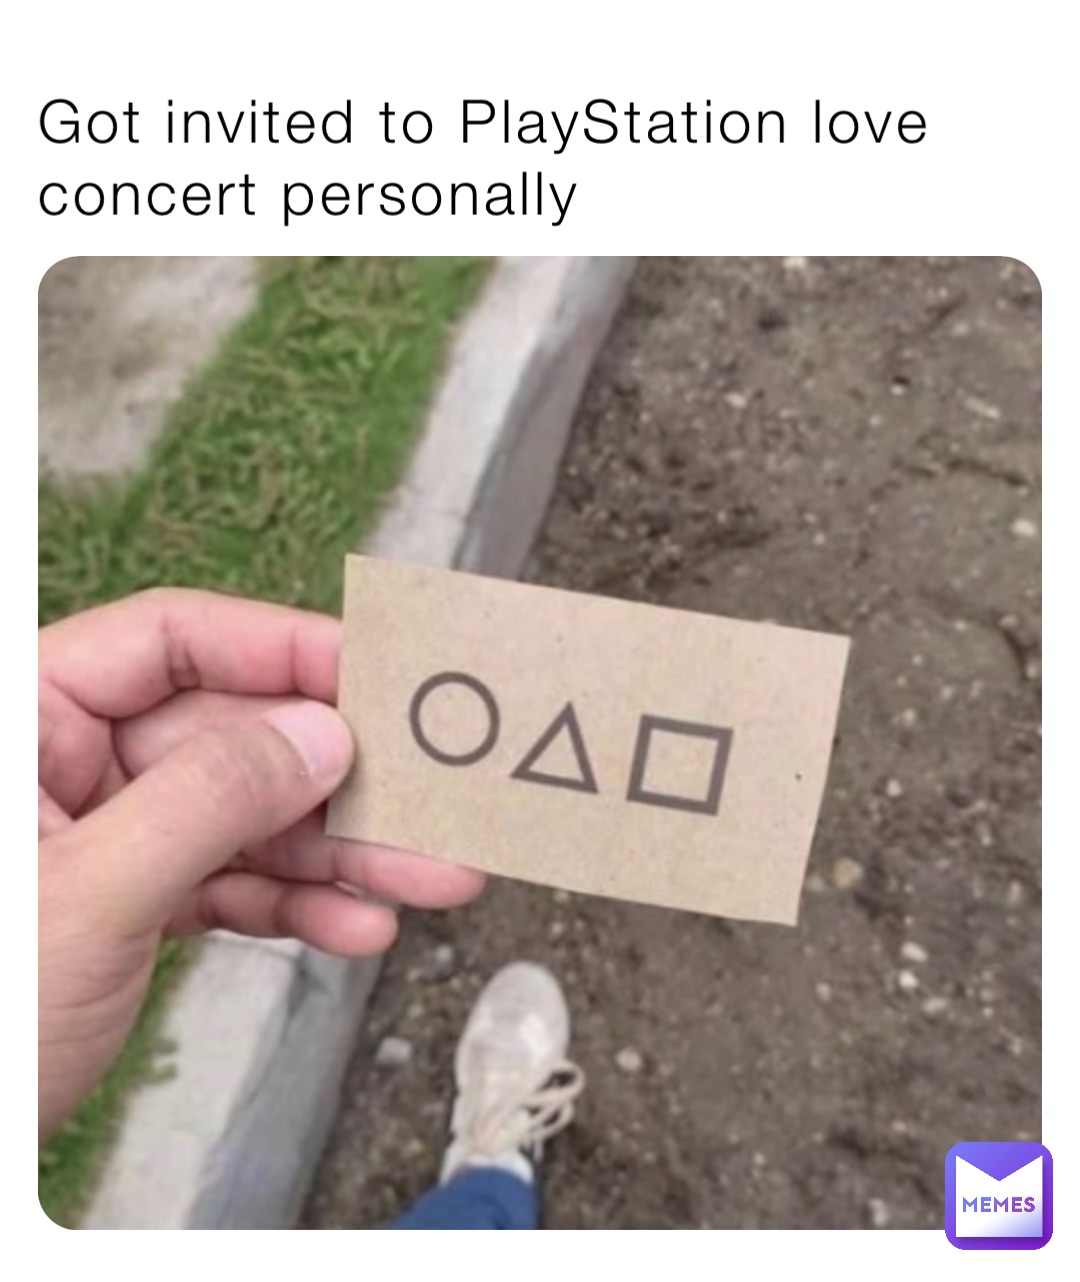 Got invited to PlayStation love concert personally